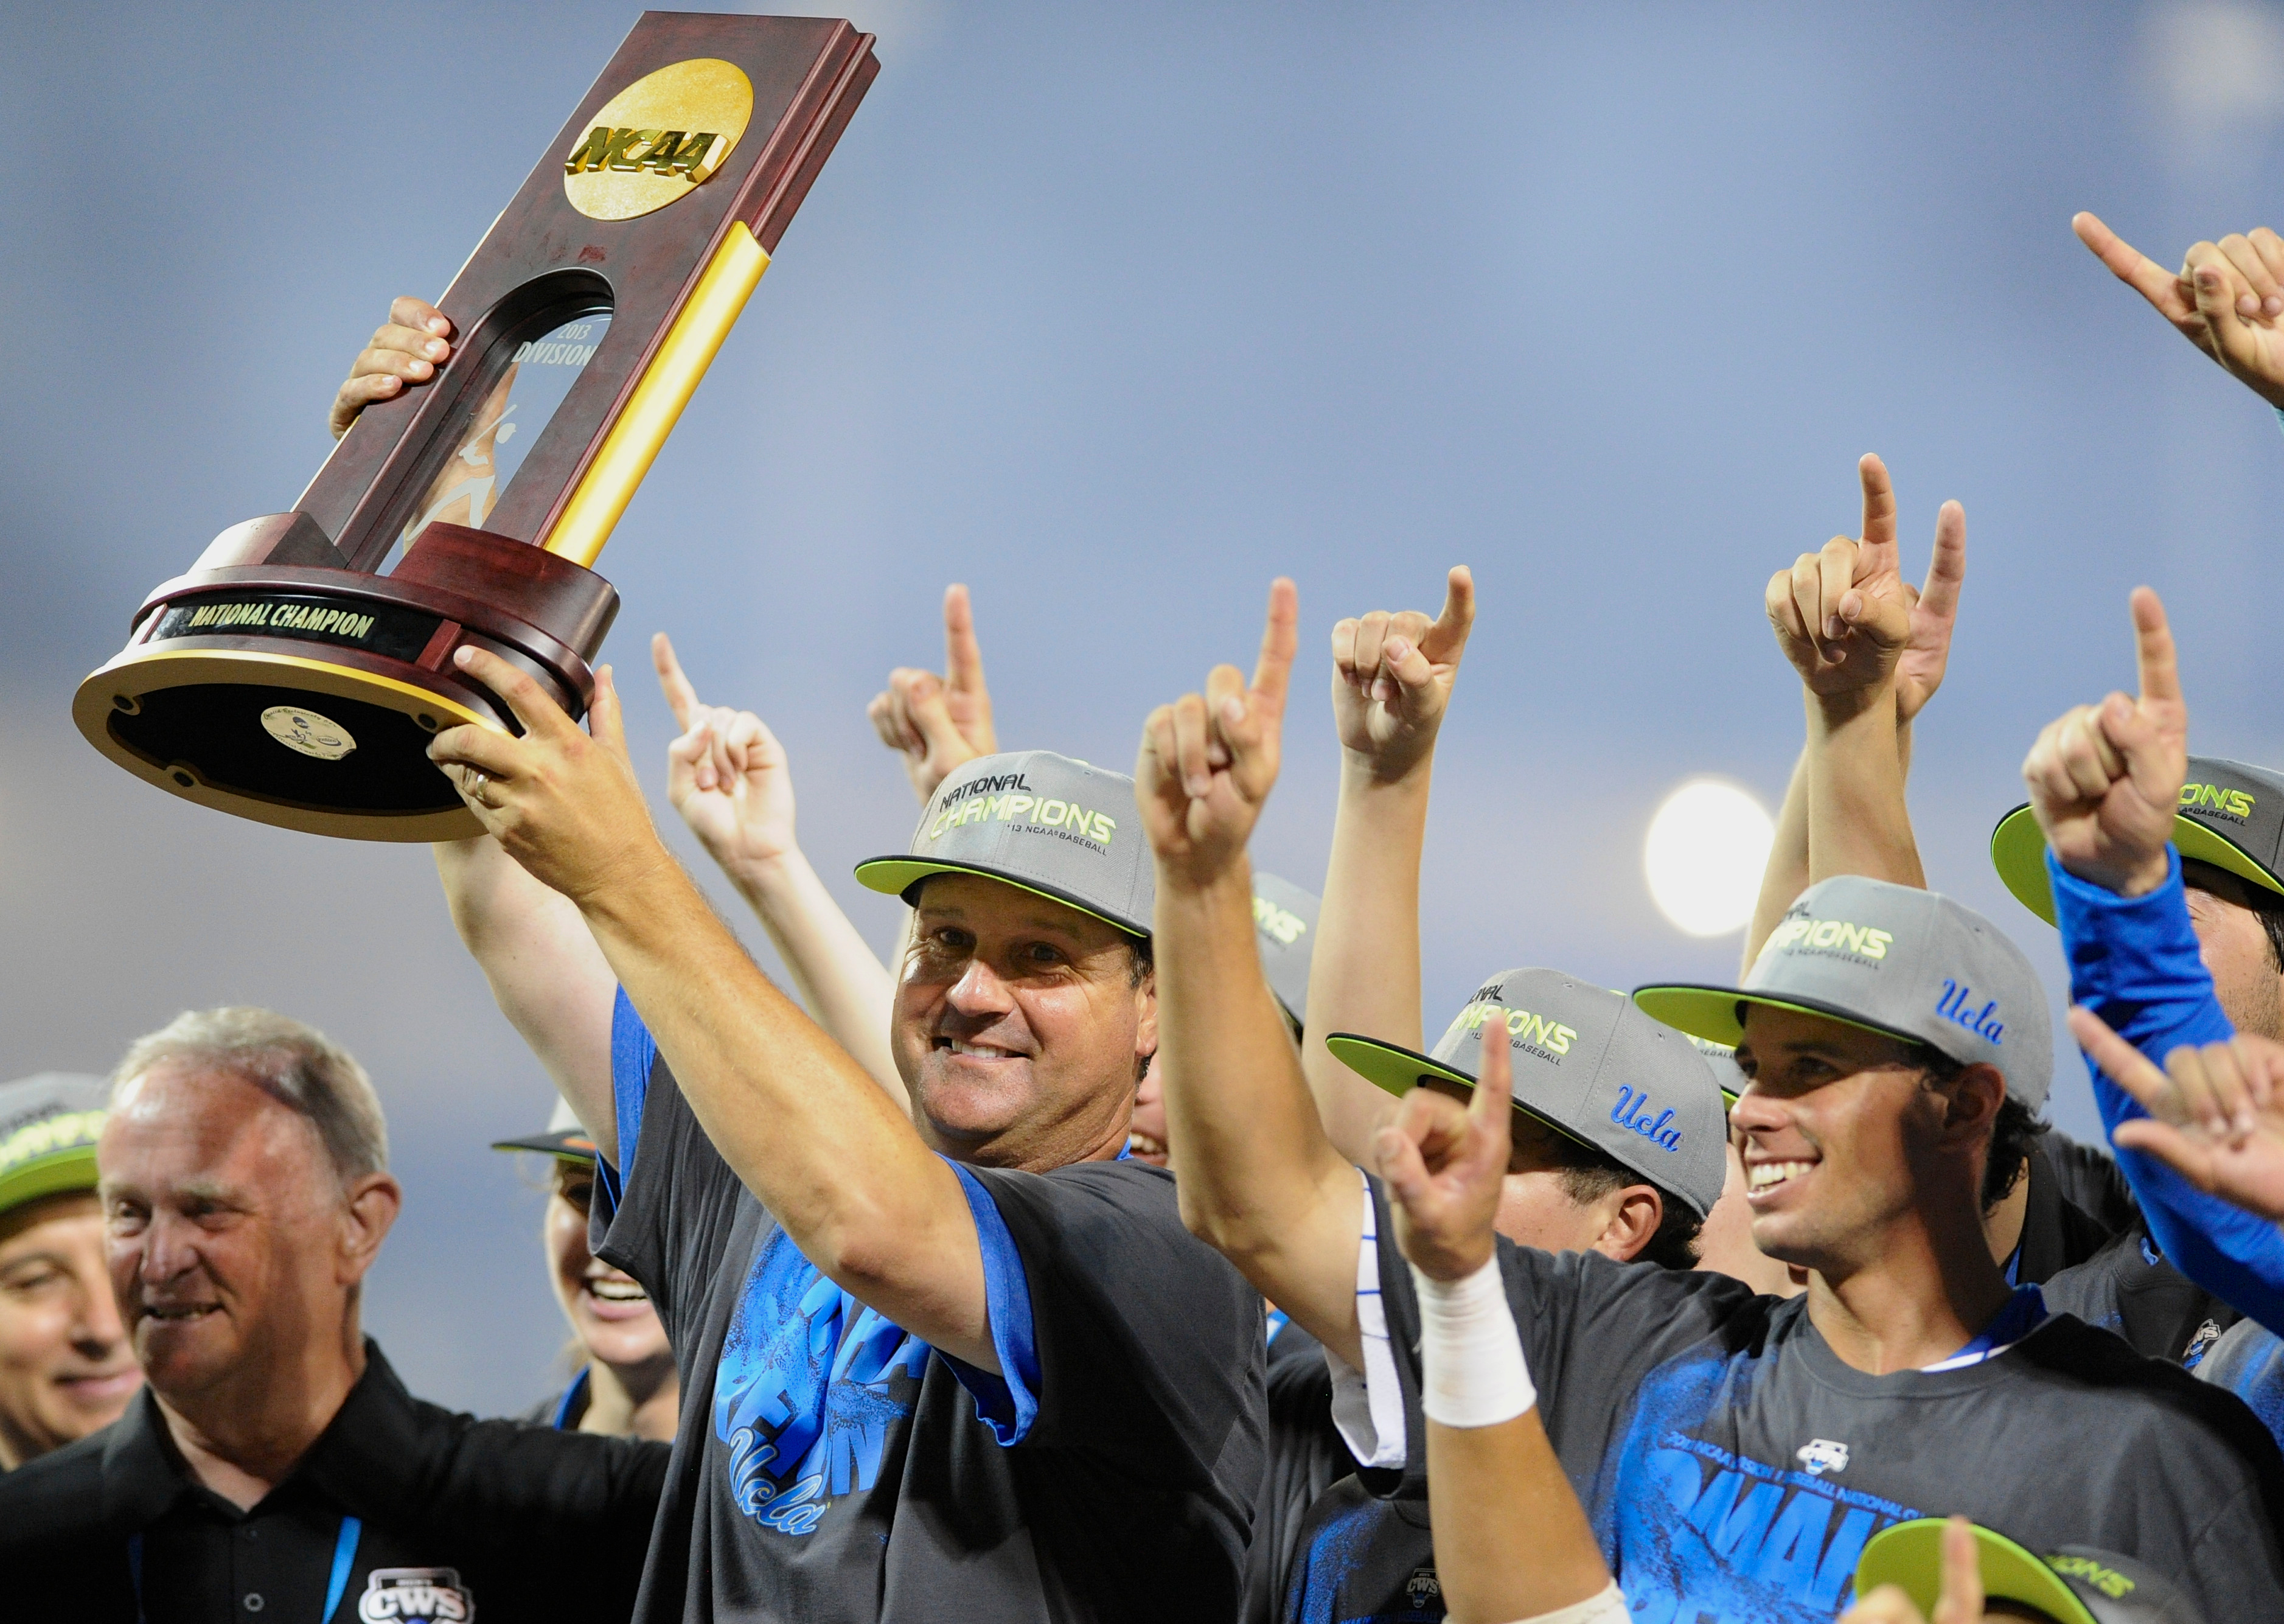 UCLA coach John Savage is surrounded by players as he hoists the College World Series championship trophy on June 25, 2013. (Eric Francis/AP)